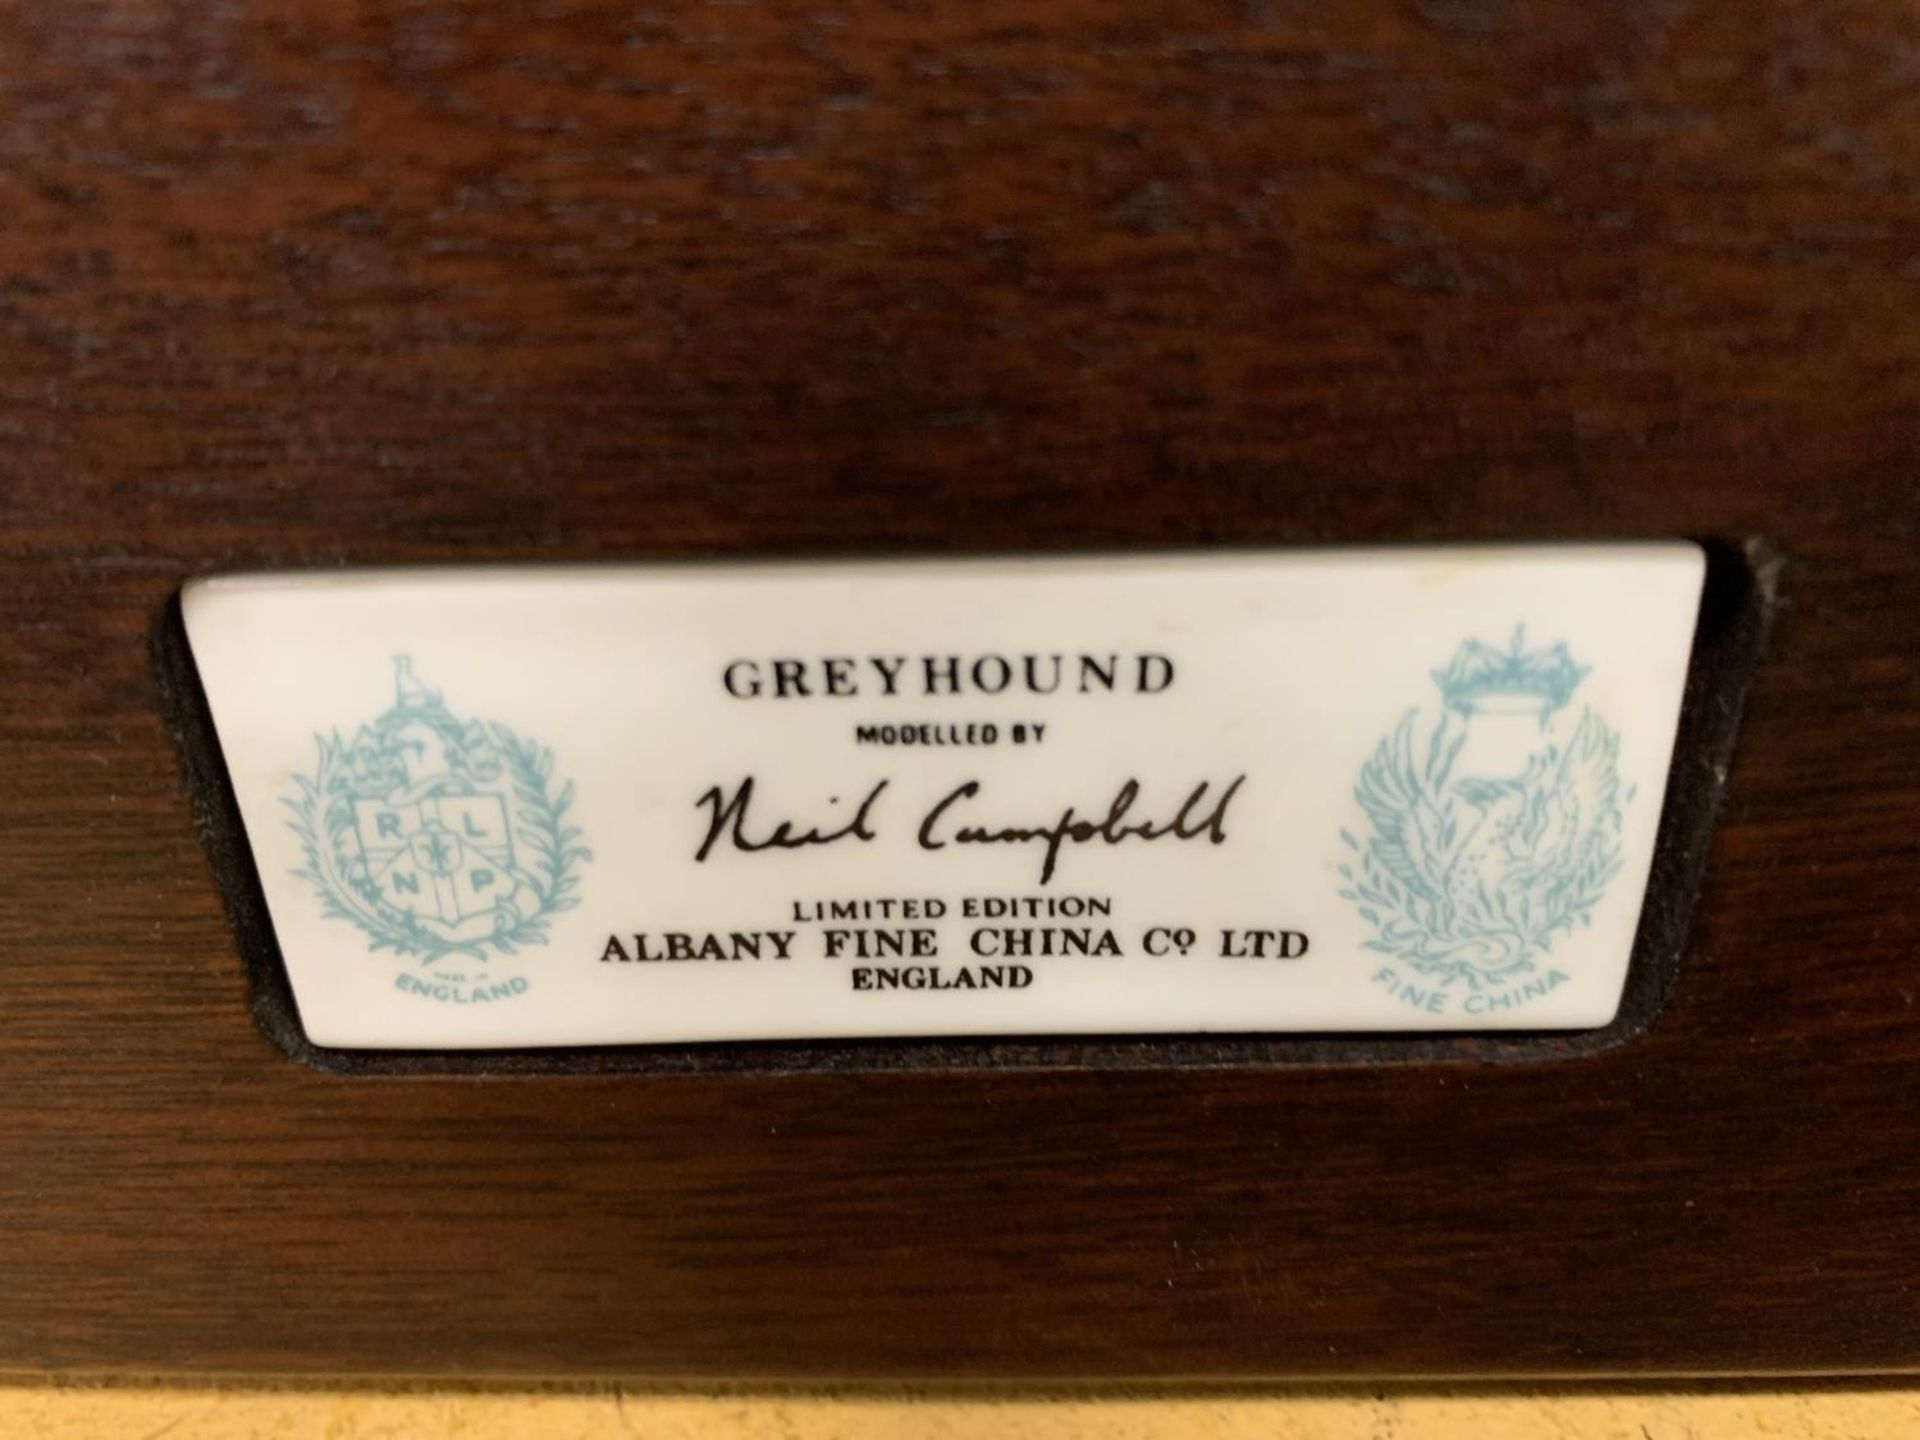 AN ALBANY FINE CHINA MODEL OF A GREYHOUND BY NEIL CAMPBELL, LILMITED EDITION 98/250 WITH CERTIFICATE - Image 6 of 6